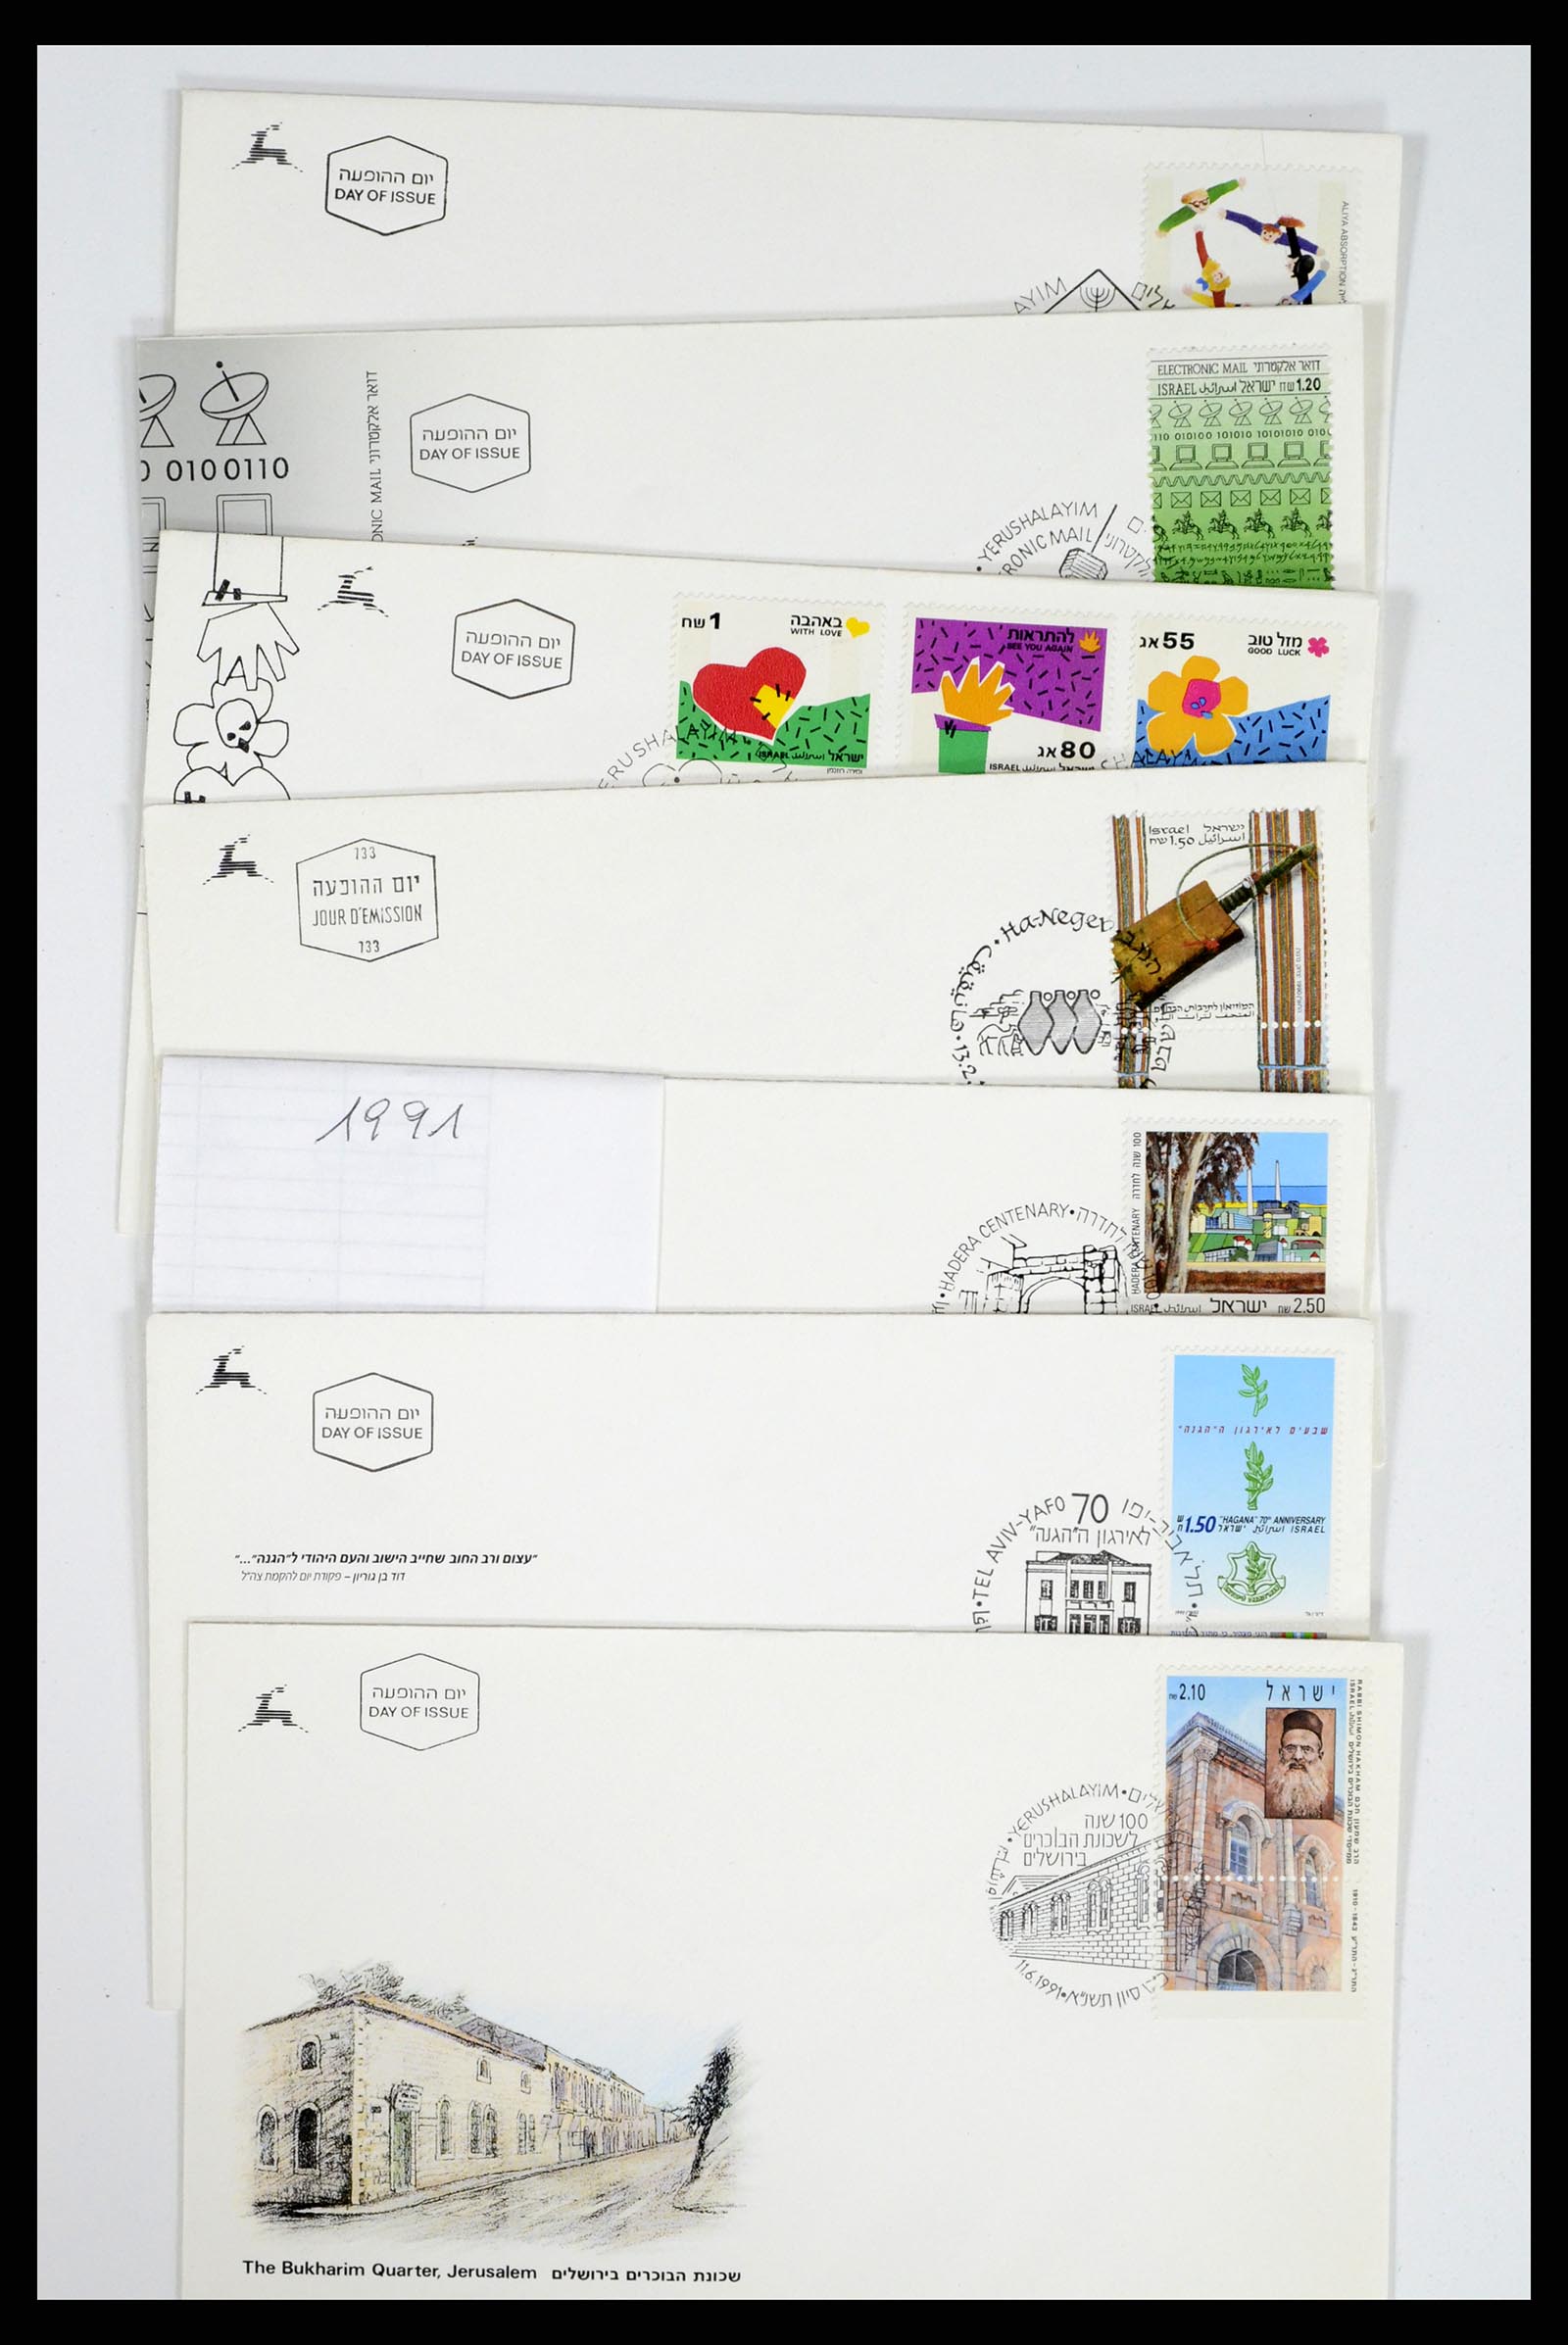 37711 037 - Stamp collection 37711 Israel first day covers 1970-2000.